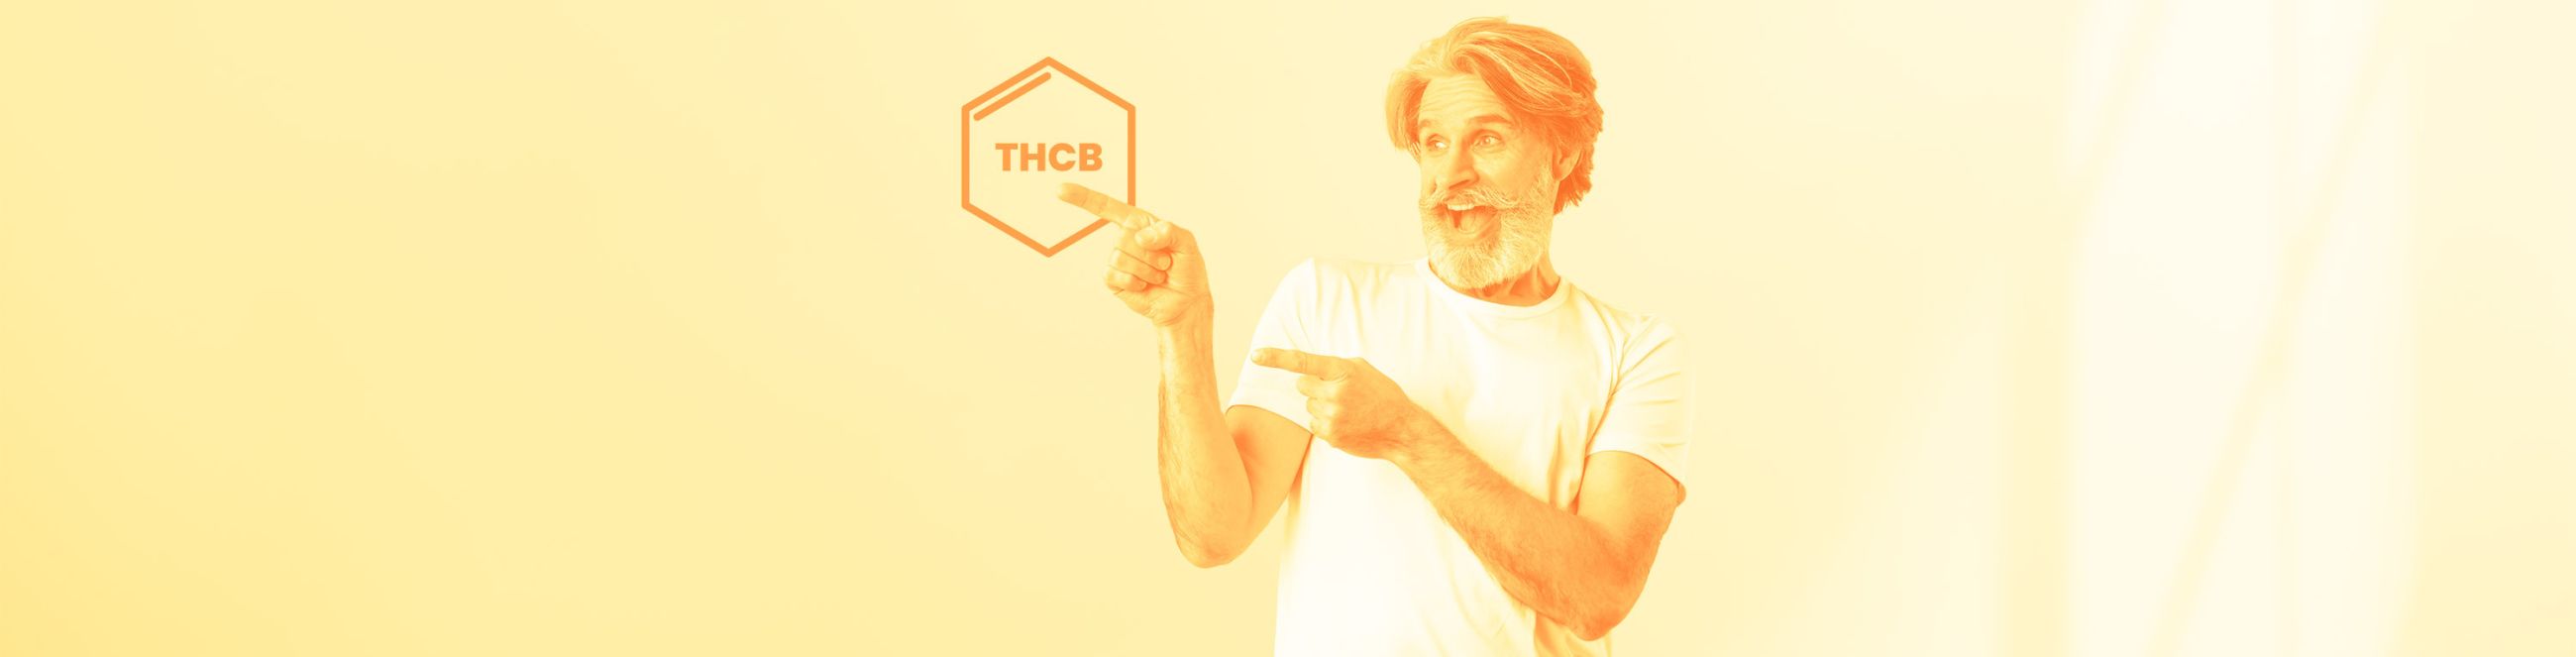 What Is THCB & How Strong Is THCB? Discover The Facts